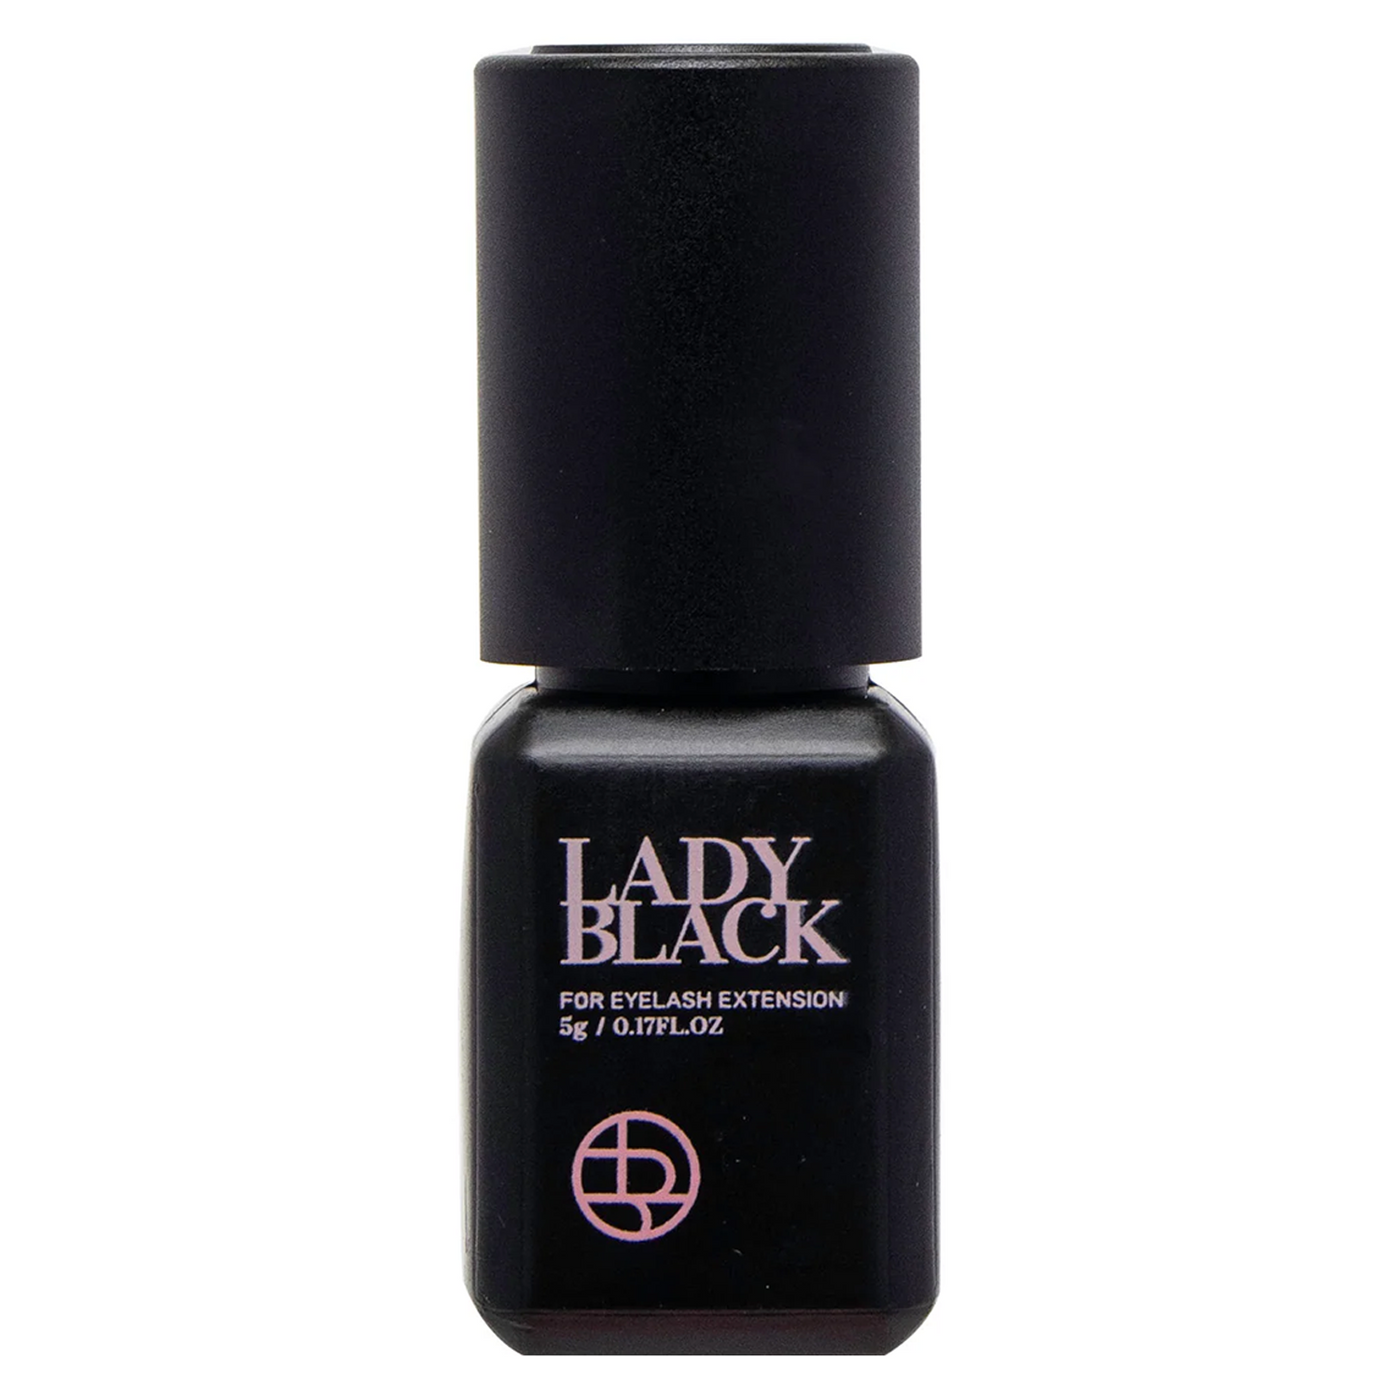 Lady Black Glue 5ml | for WHOLESALE Pre-order Only